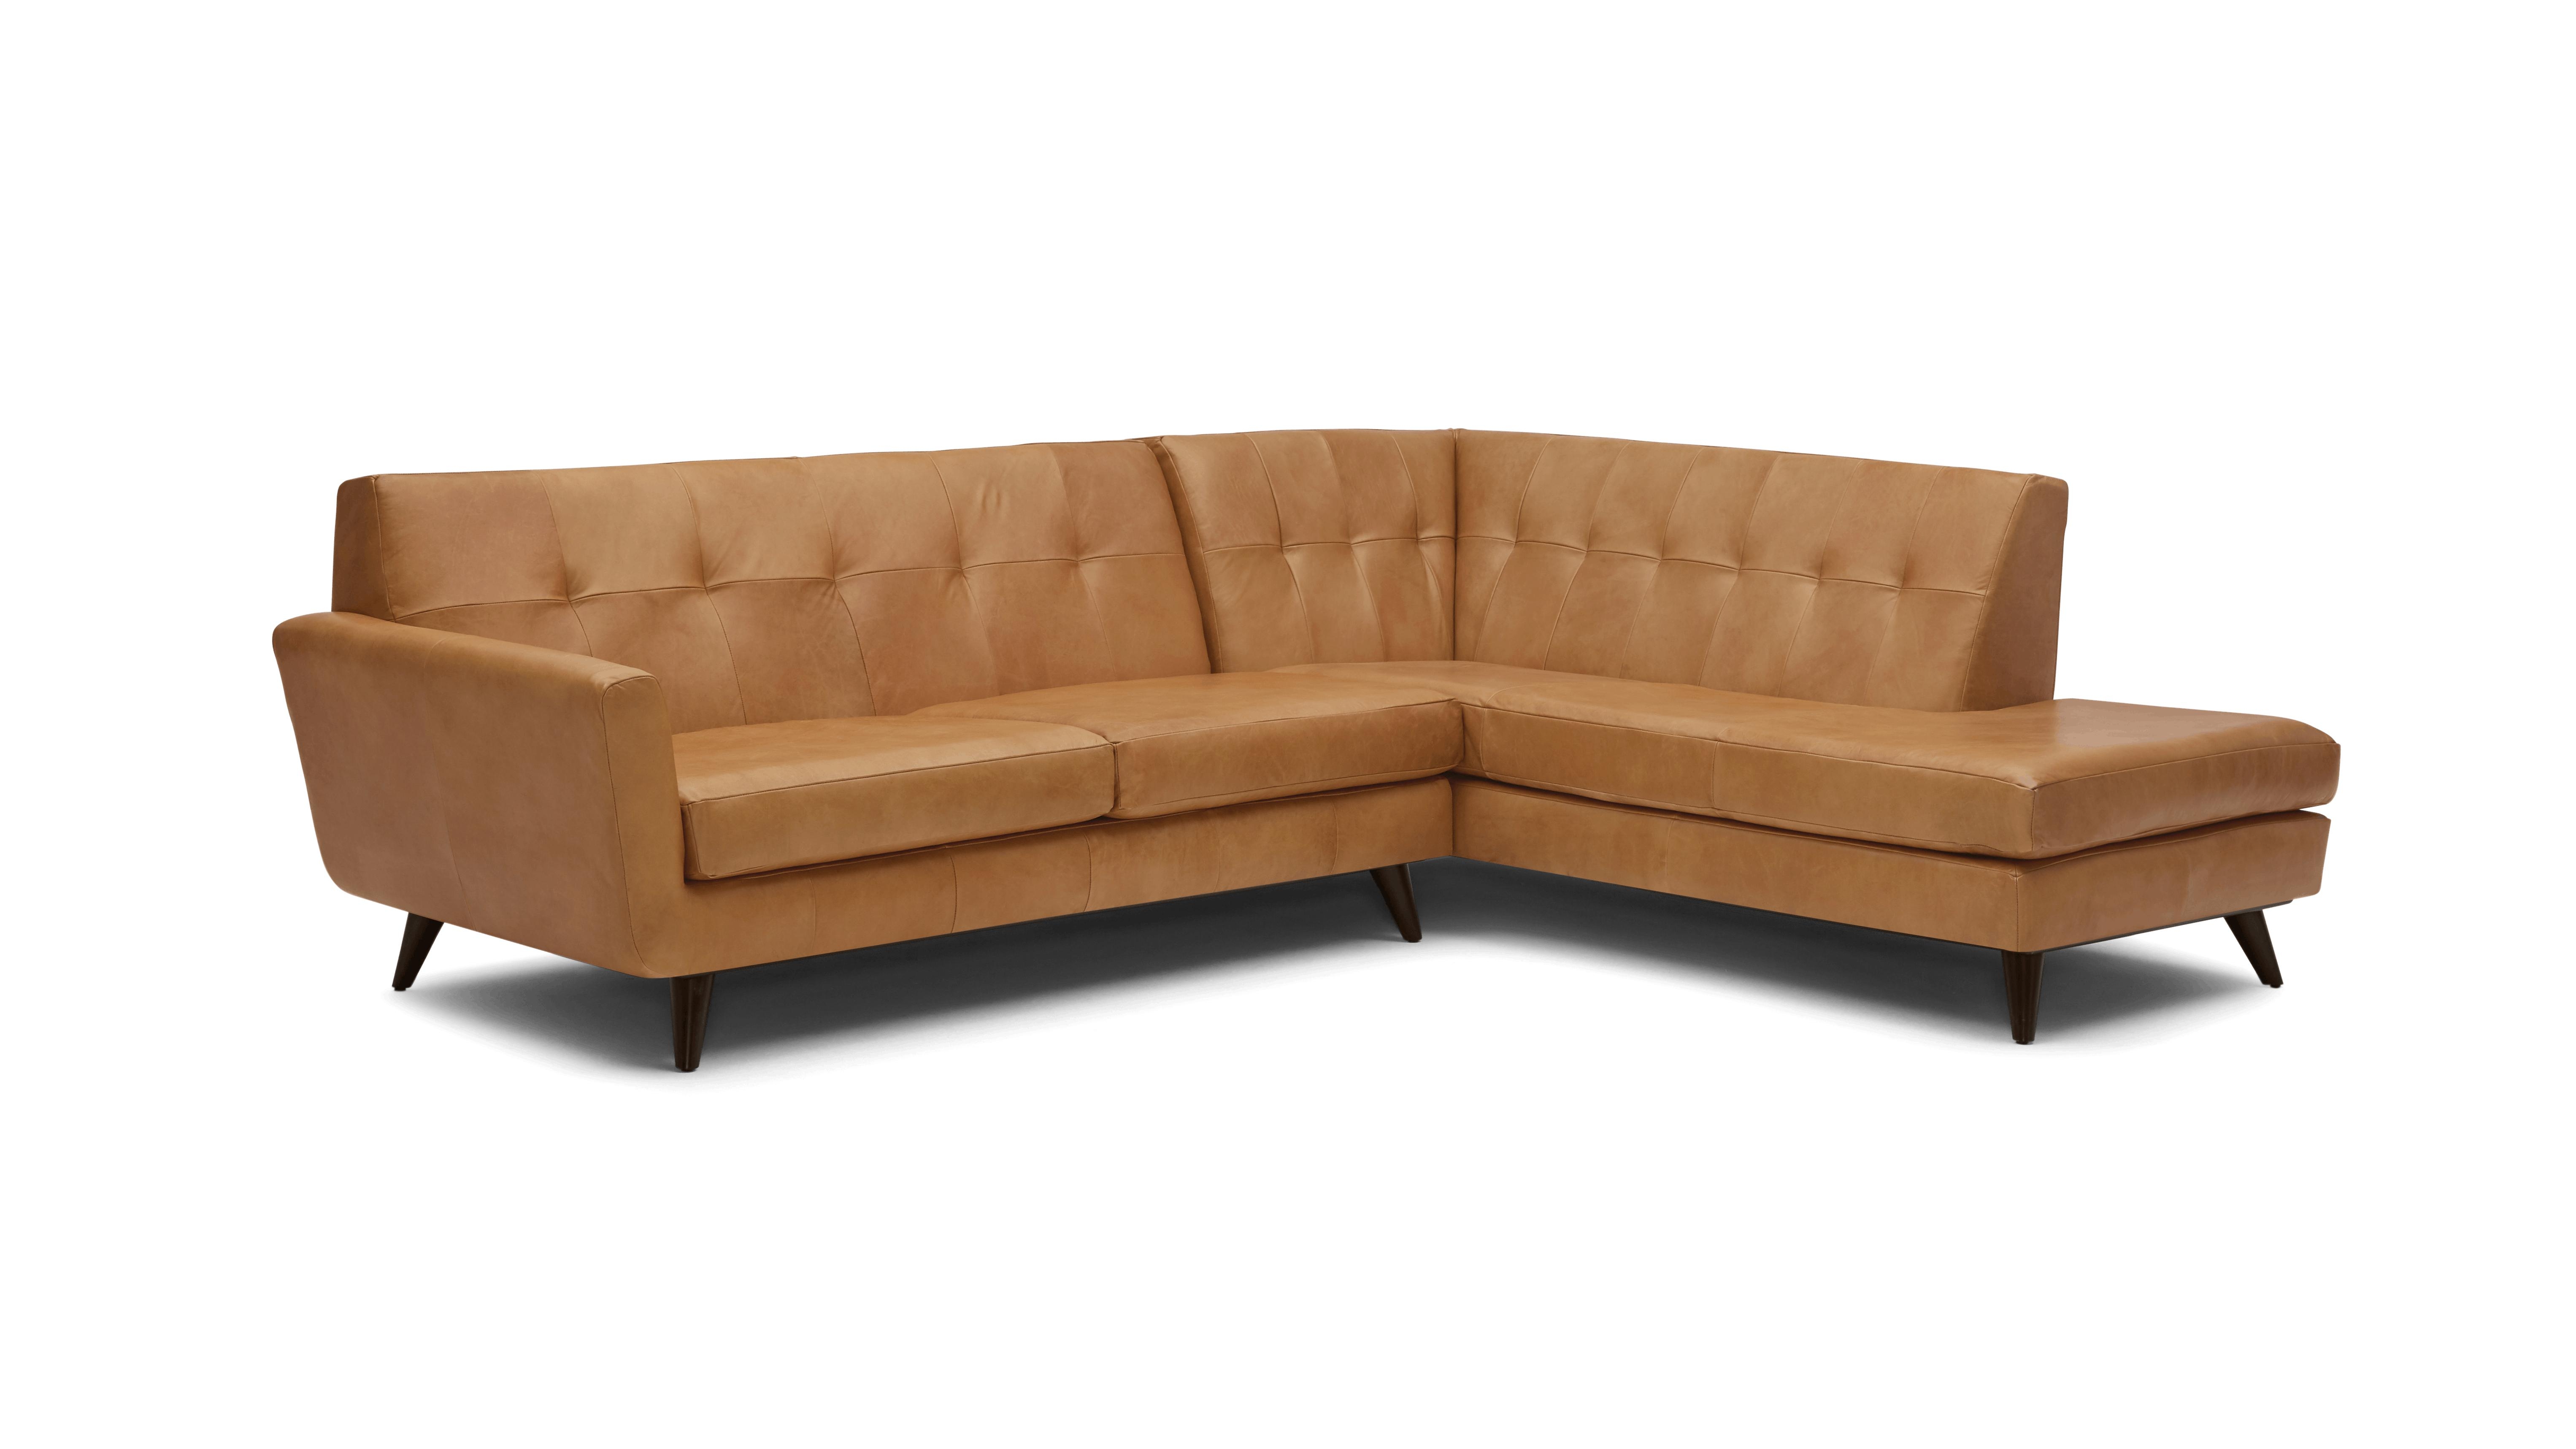 Brown Hughes Mid Century Modern Leather Sectional with Bumper (2 piece) - Santiago Camel - Mocha - Left - Image 1